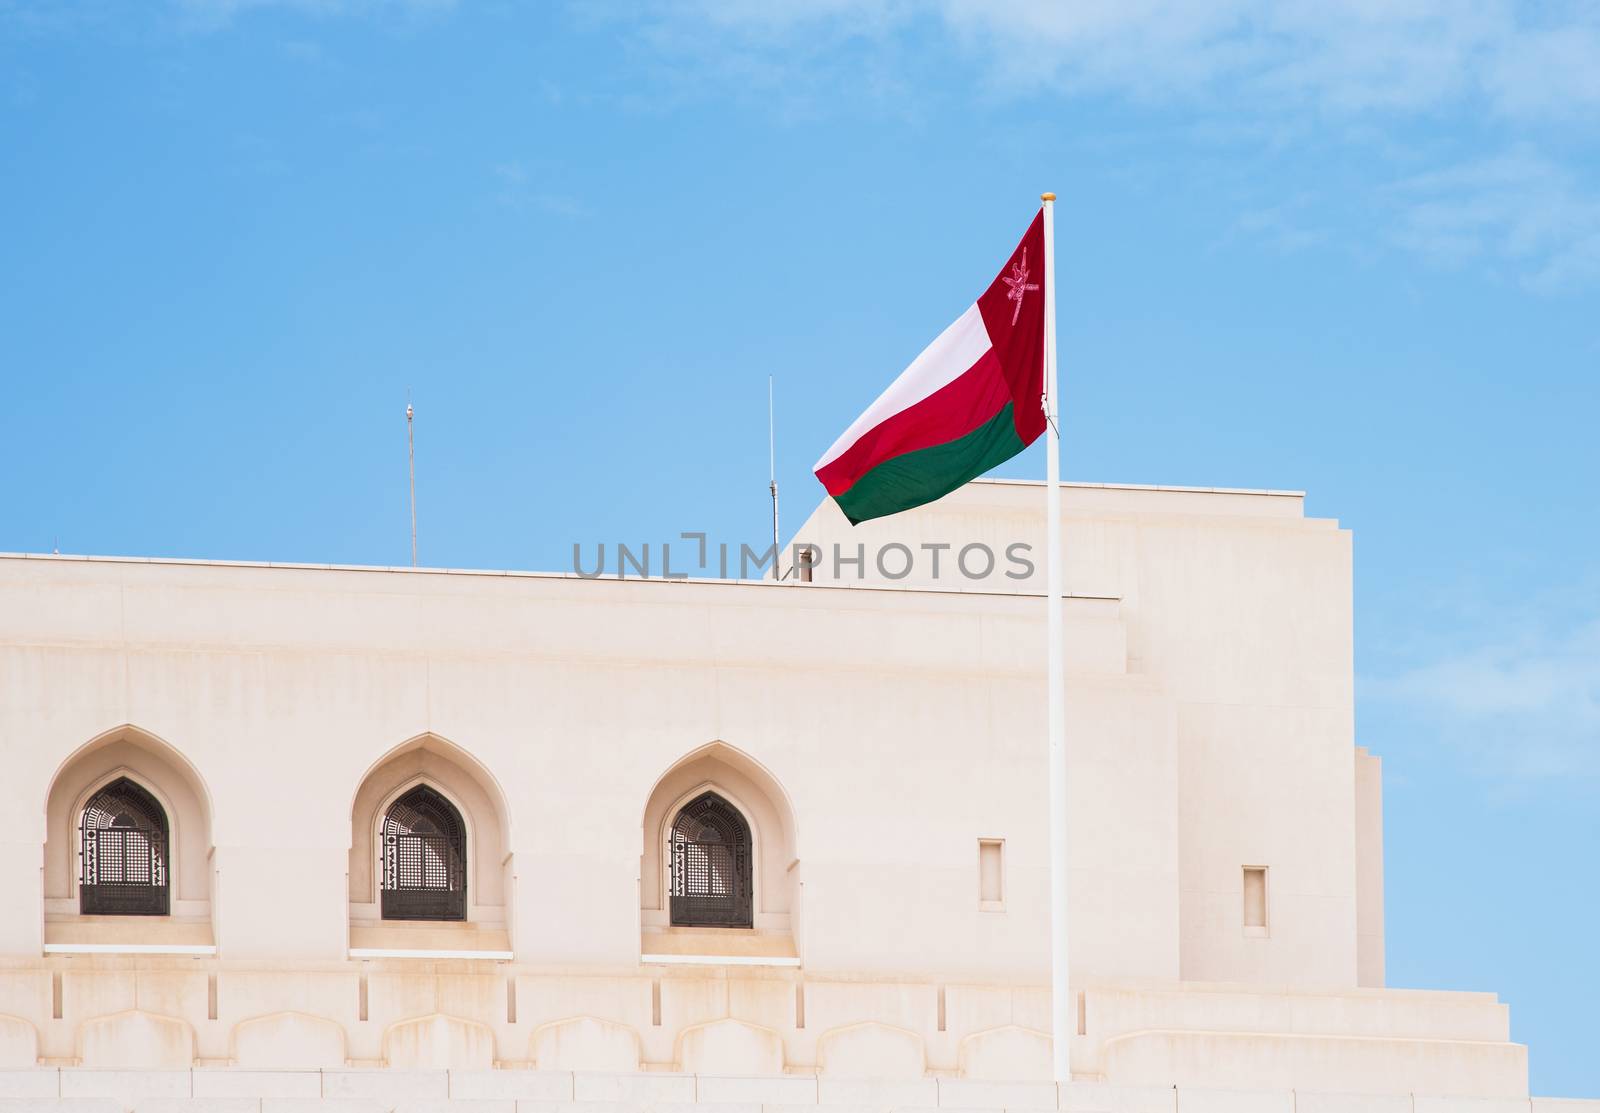 The flag of Oman at The Royal Opera House in Muscat, one of many cultural projects initiated by Sultan Qaboos bin Said al Said.